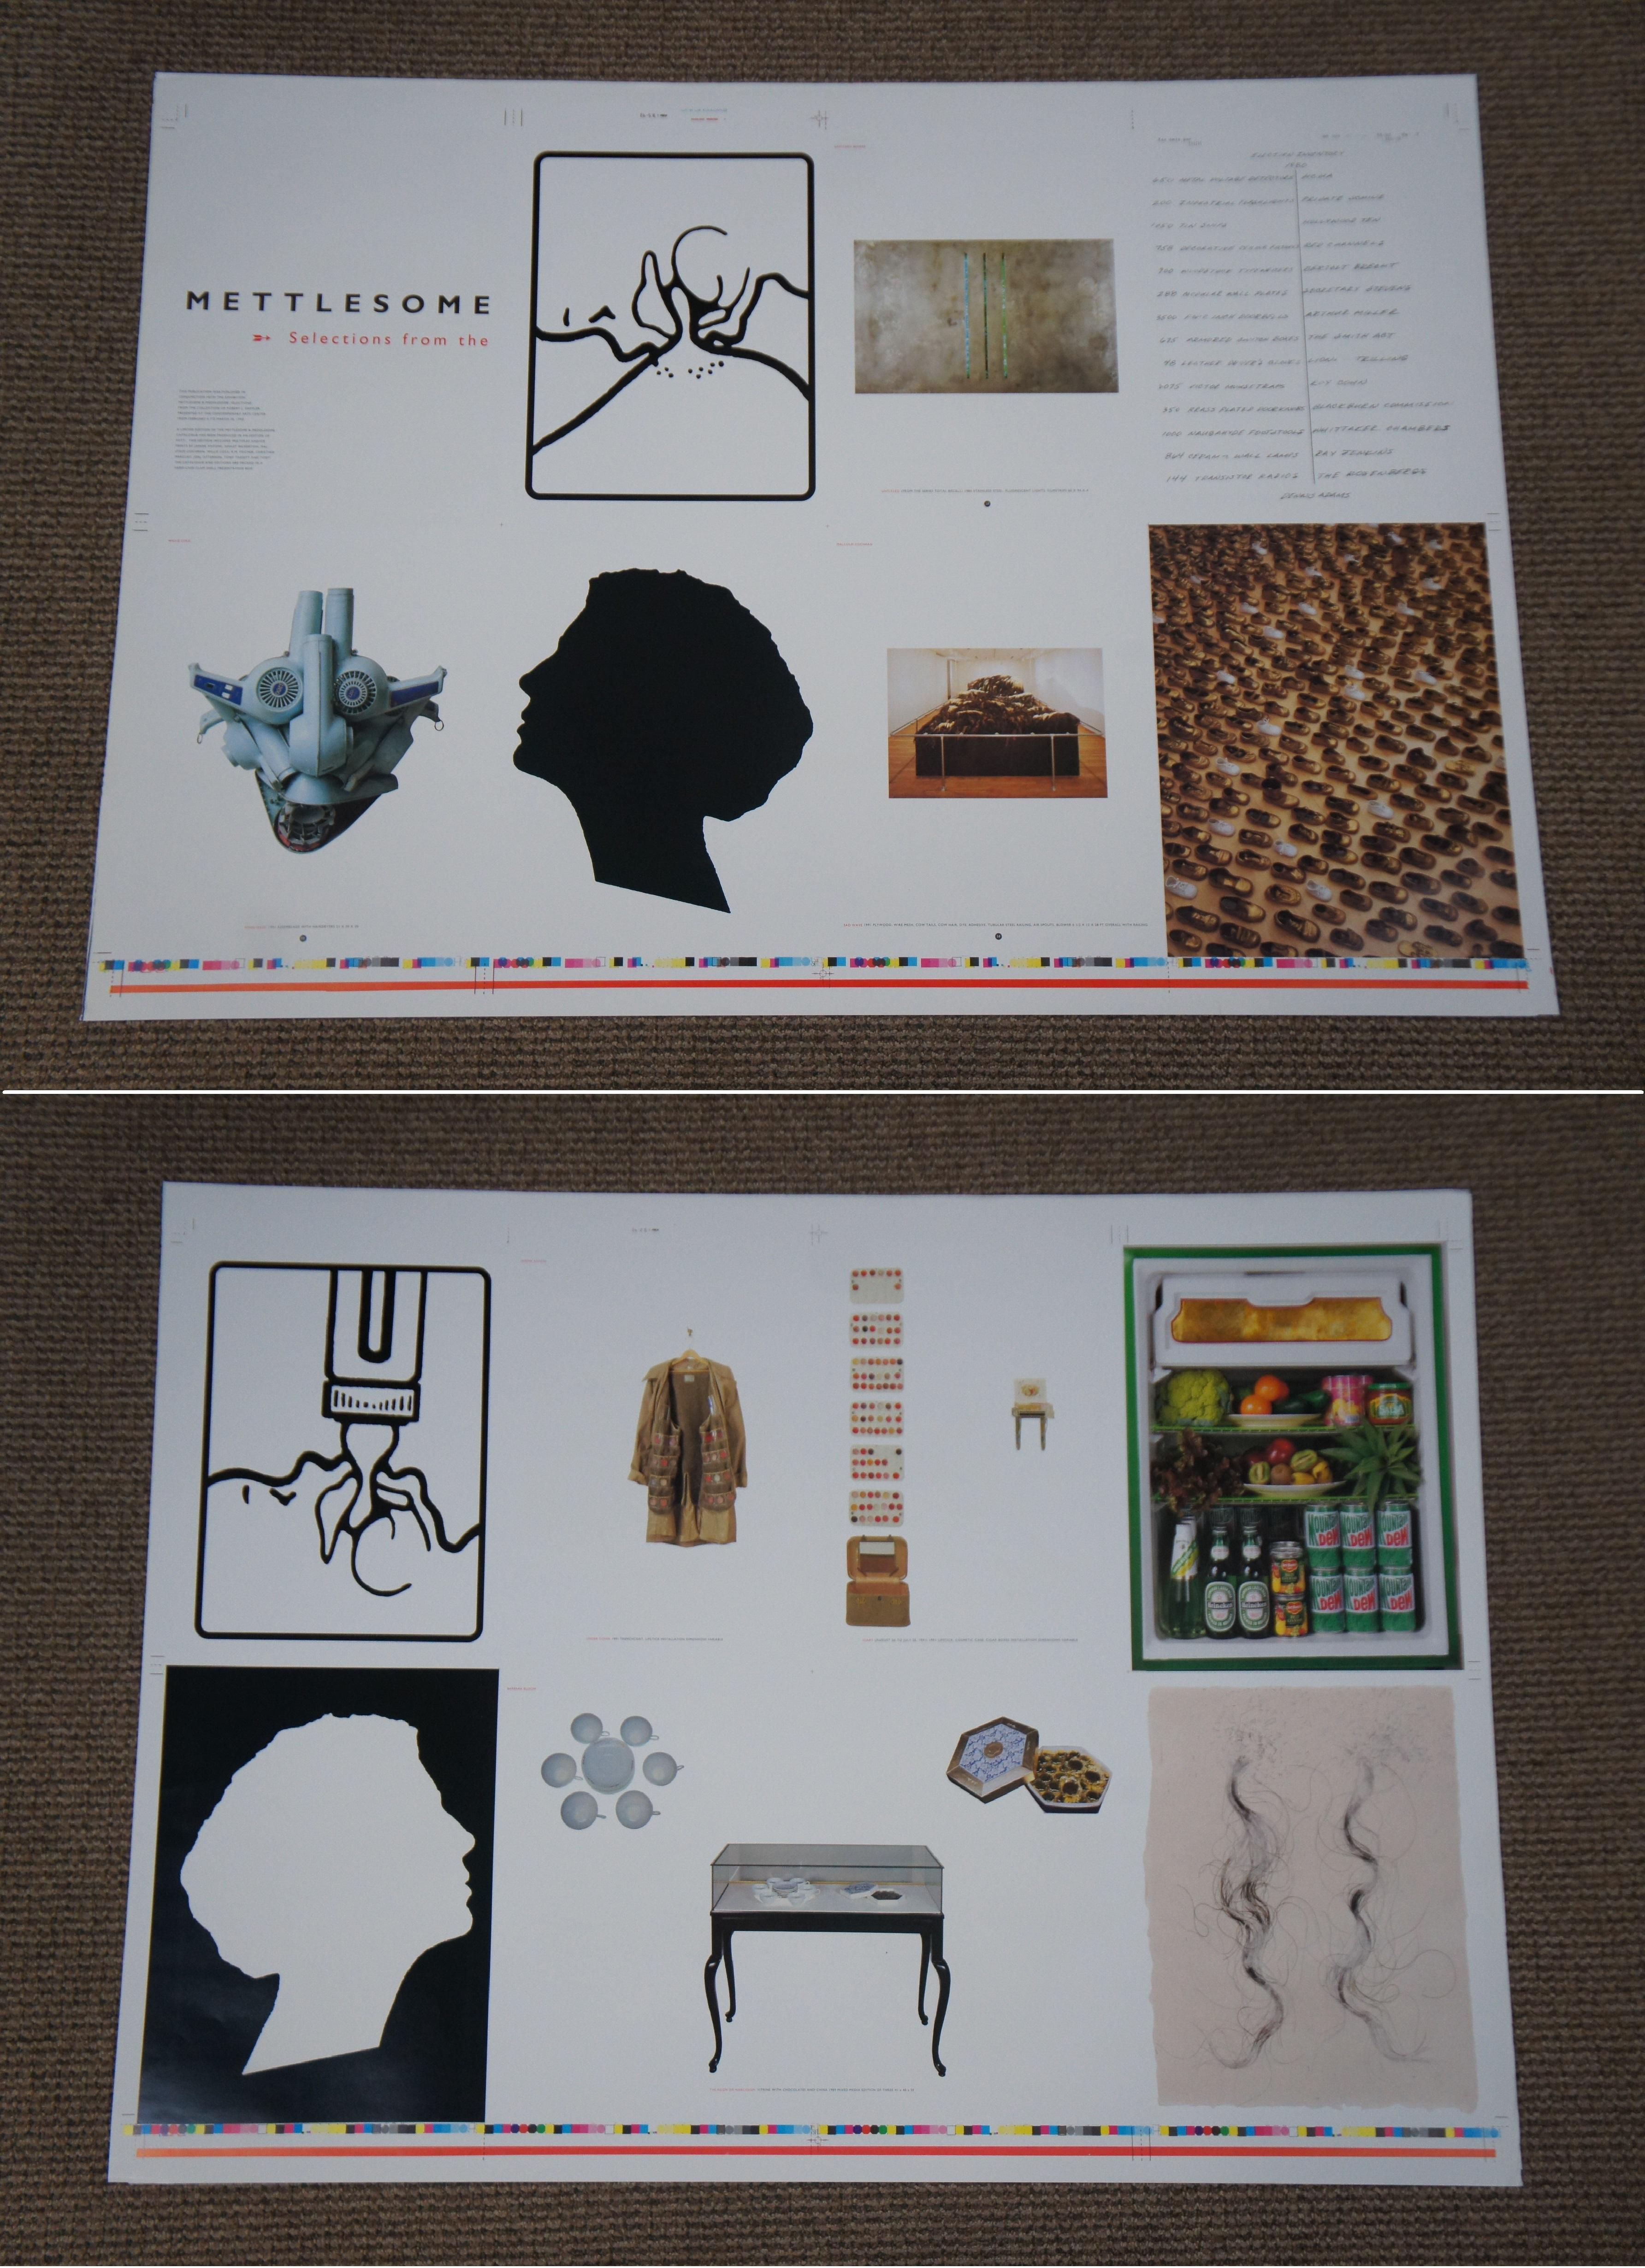 Paper Meddlesome & Mettlesome Exhibition Catalog Press Sheet Lot Contemporary Artwork For Sale